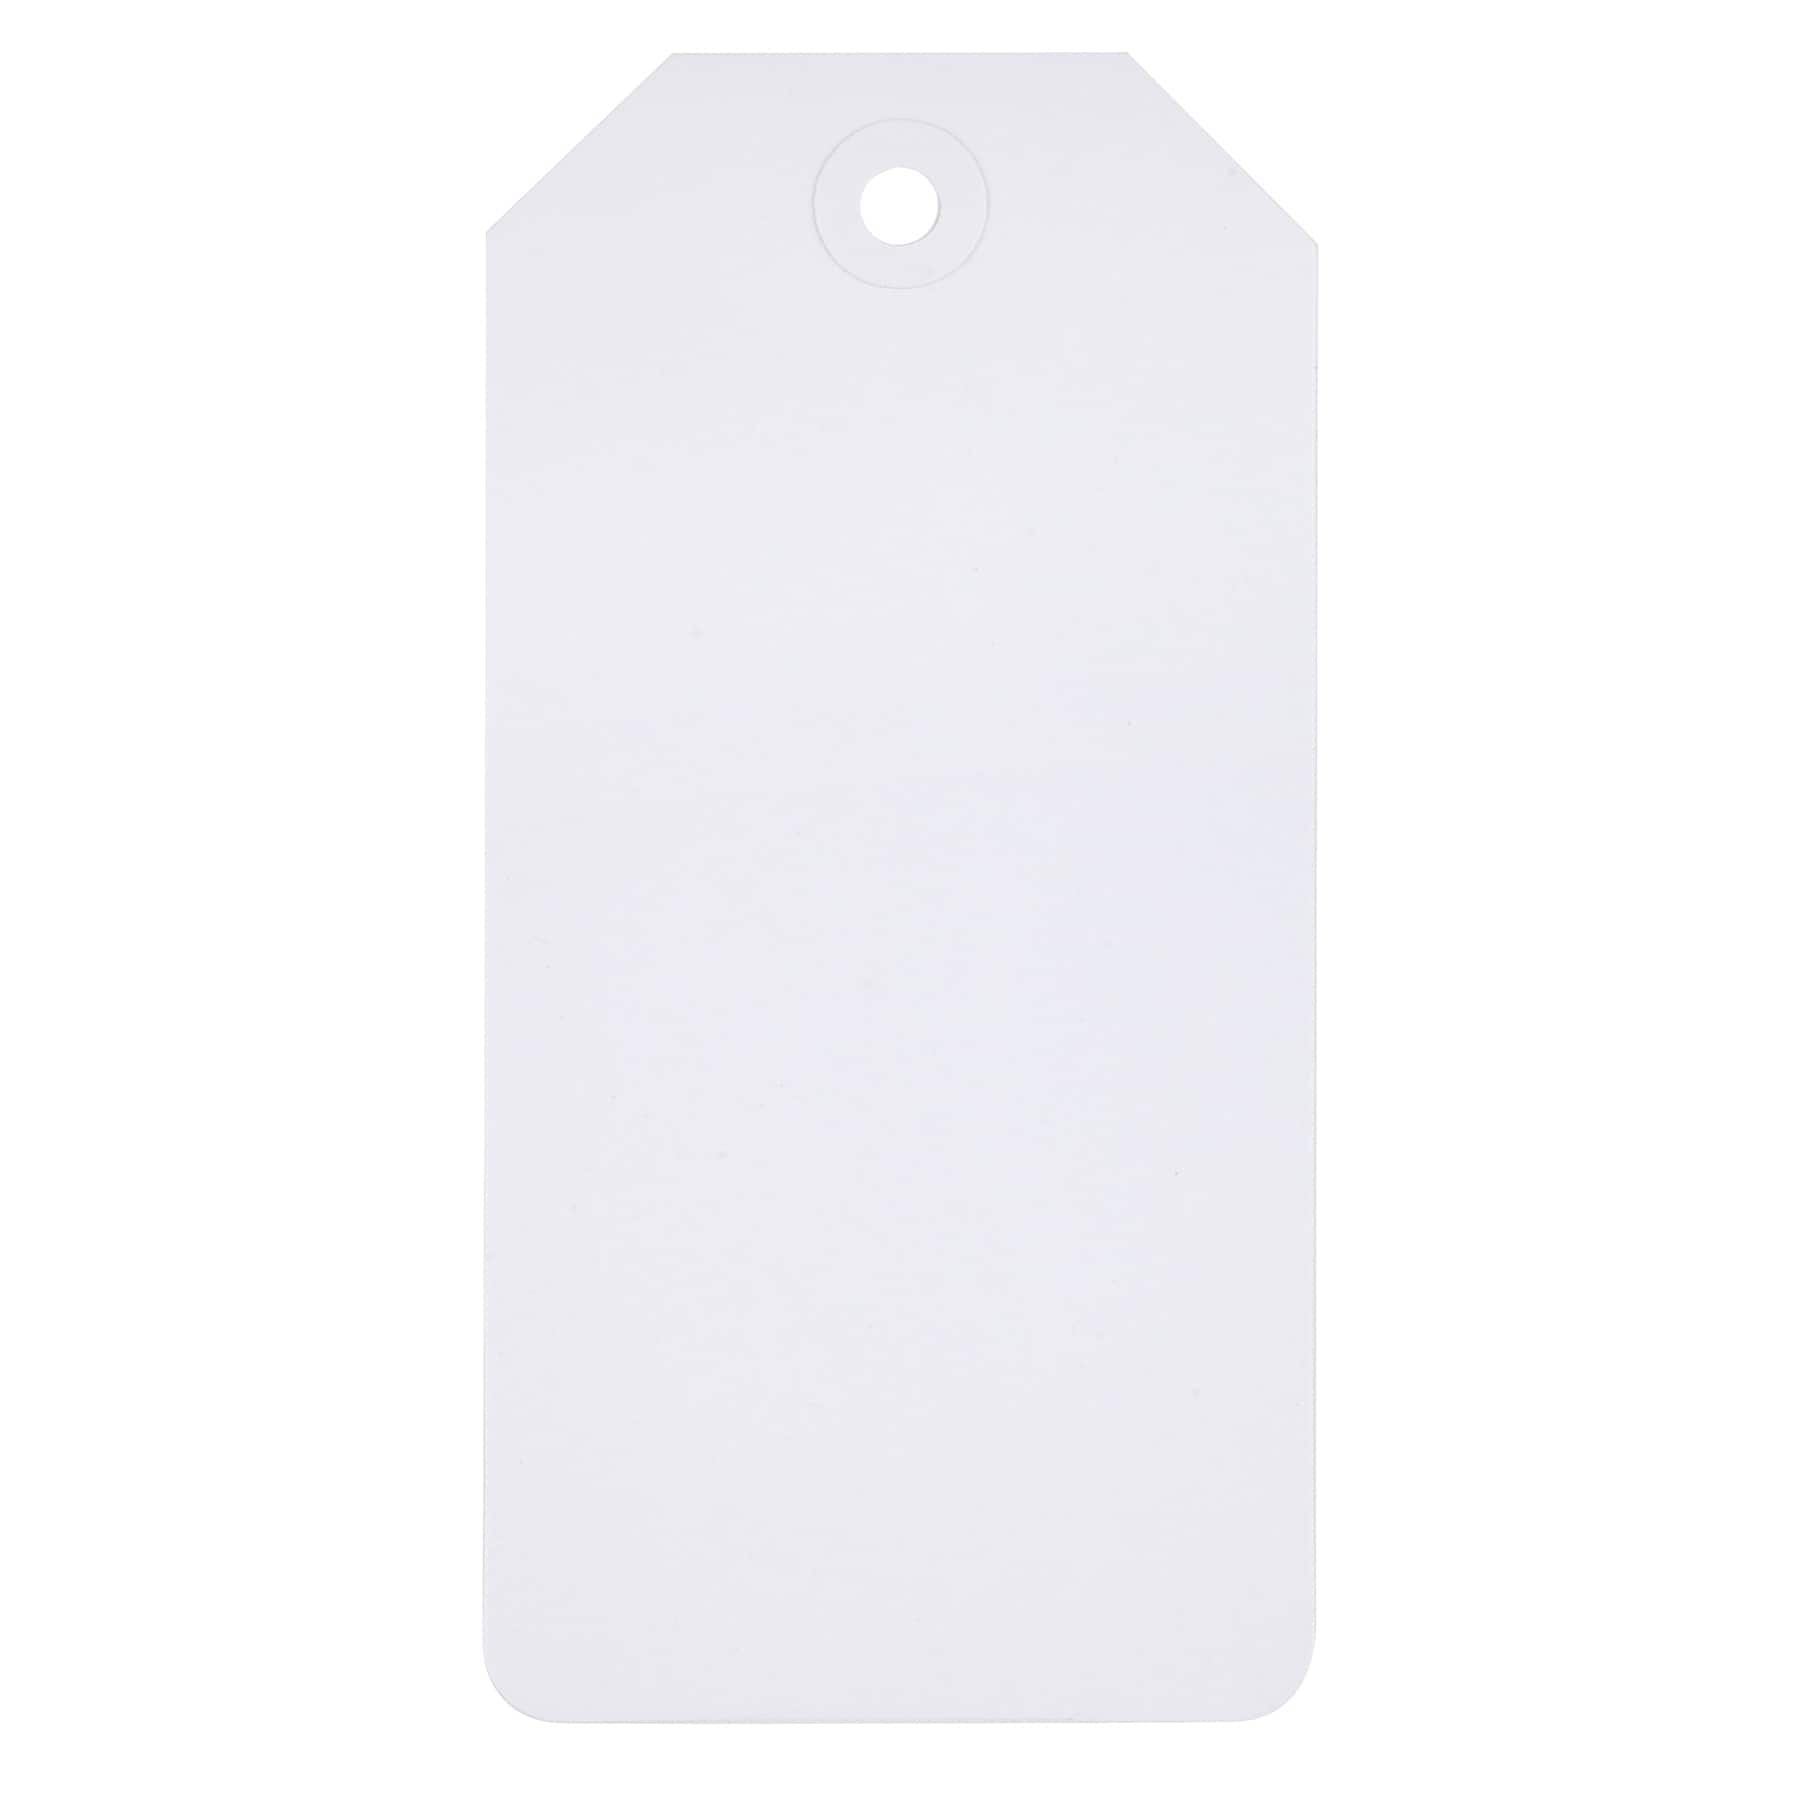 JAM Paper White Tiny Gift Tags with String, 100ct.